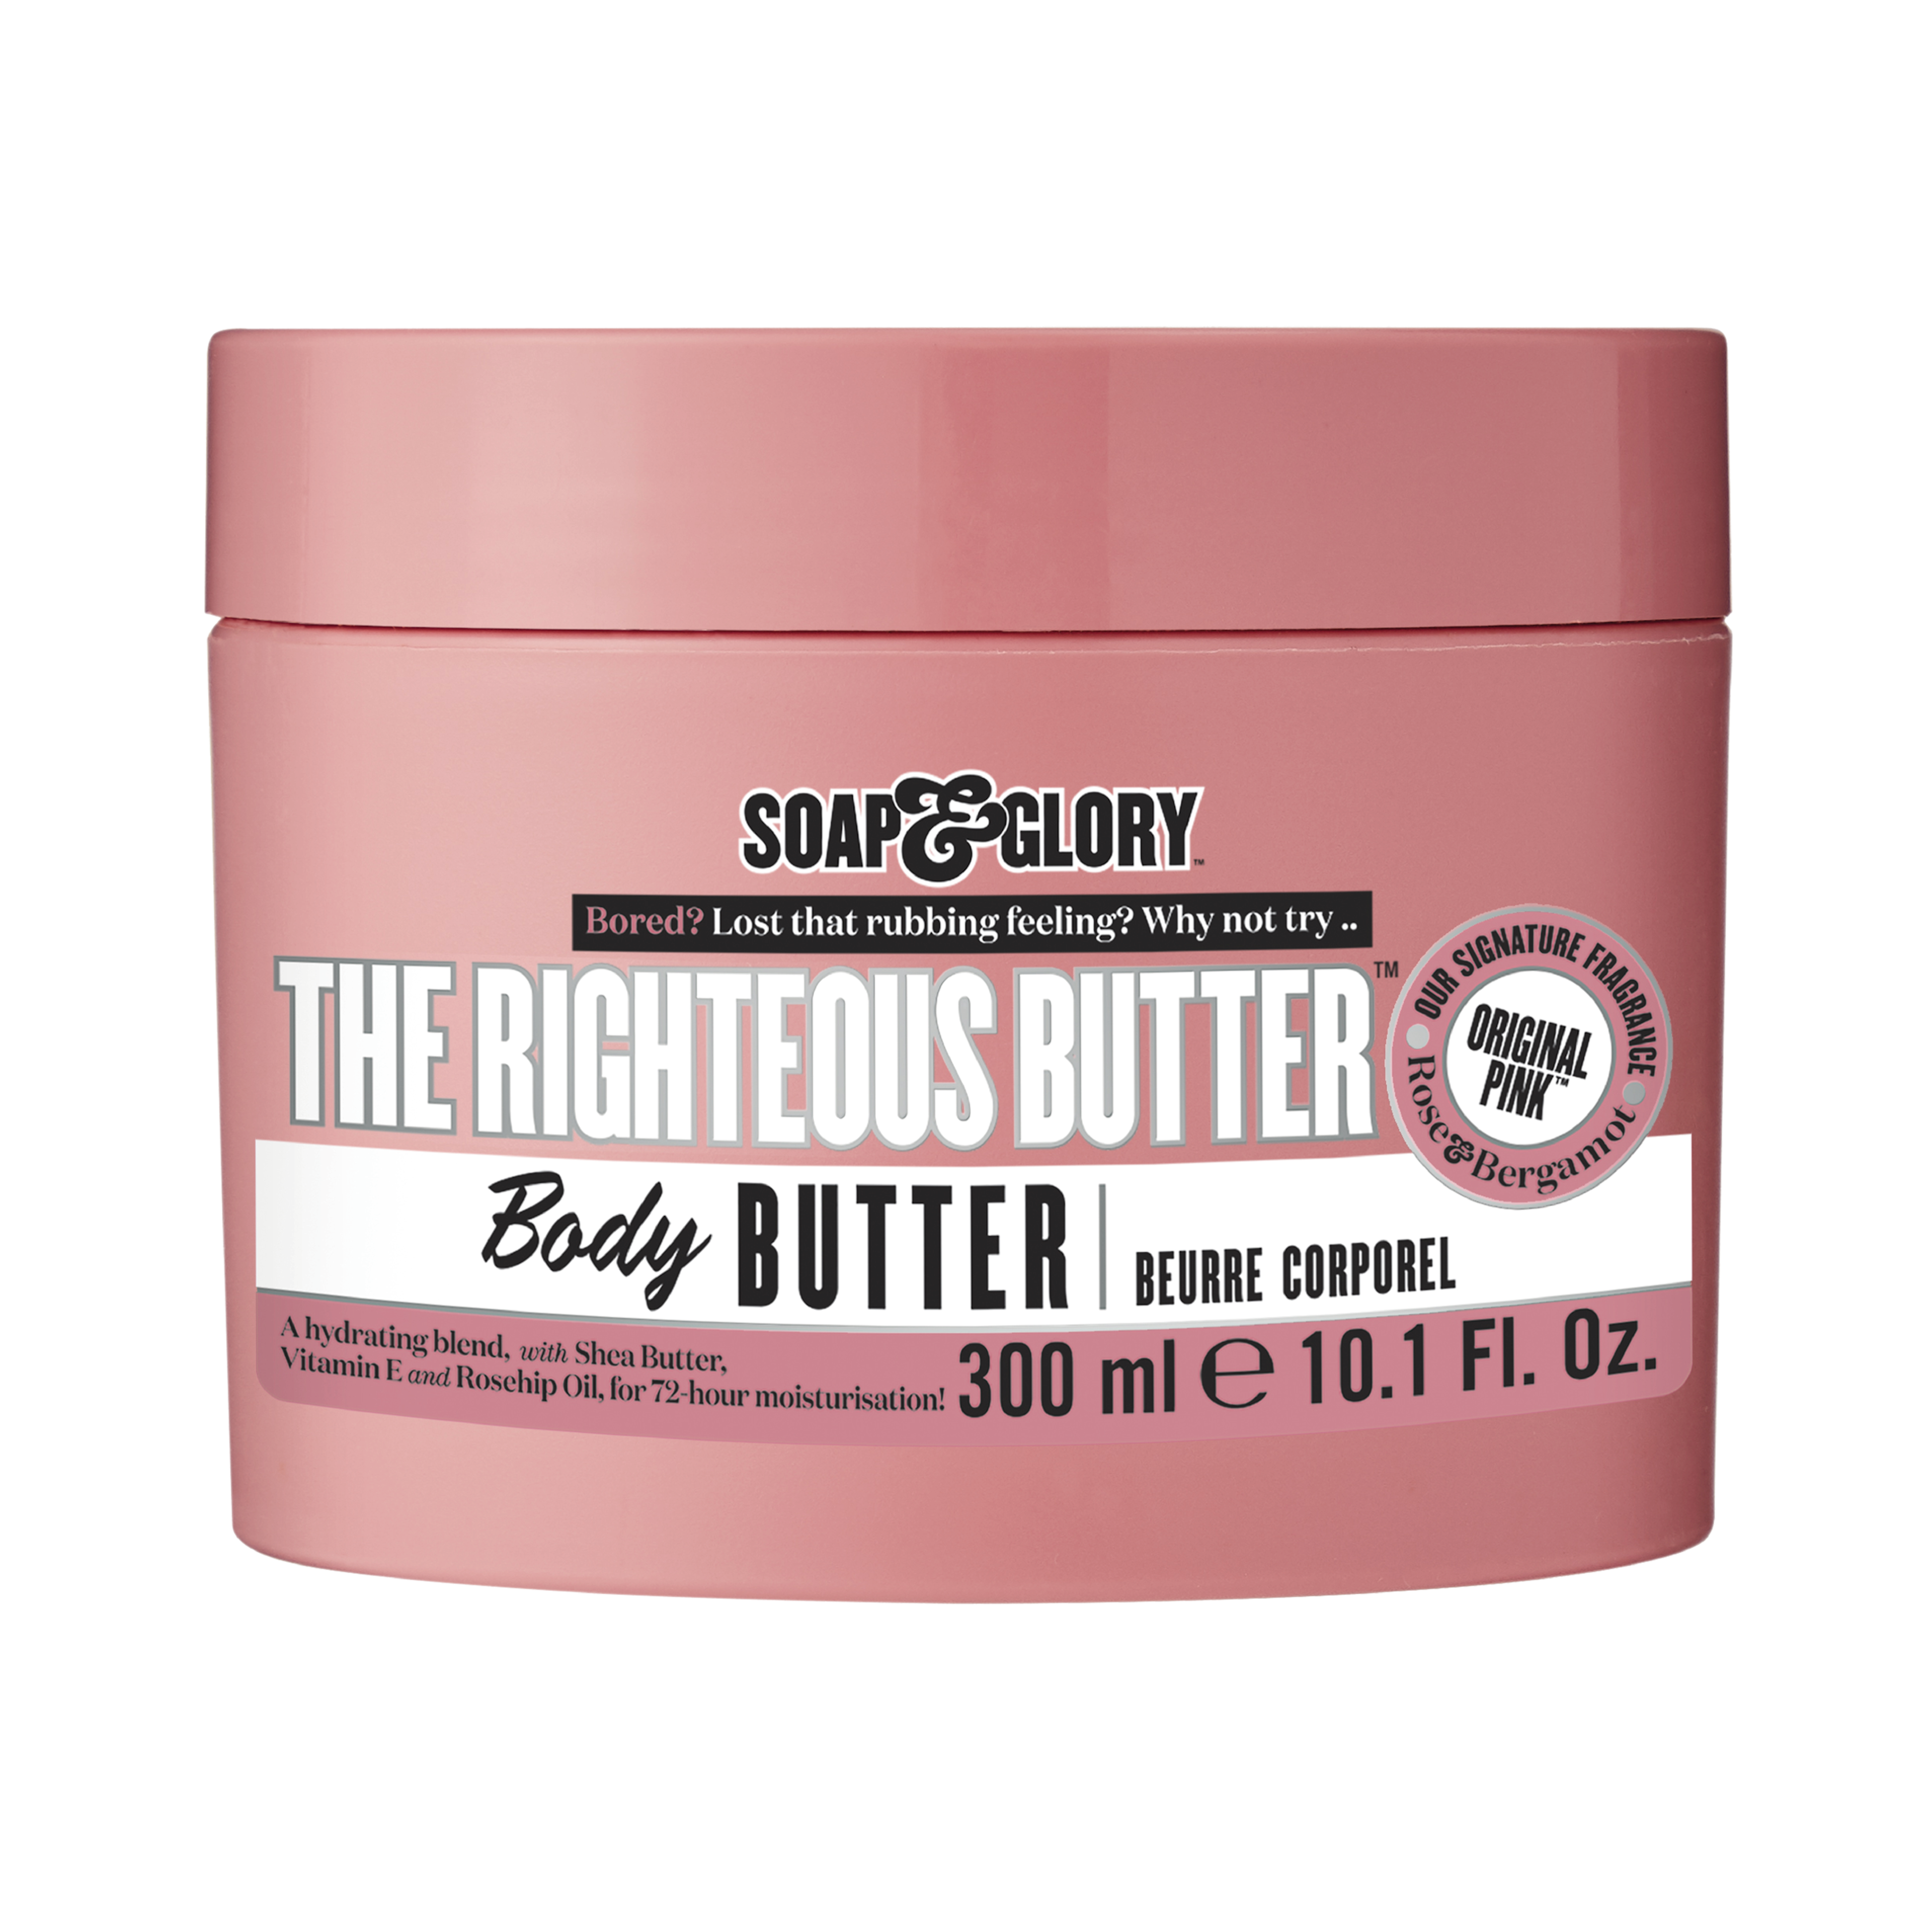 Righteous Butter